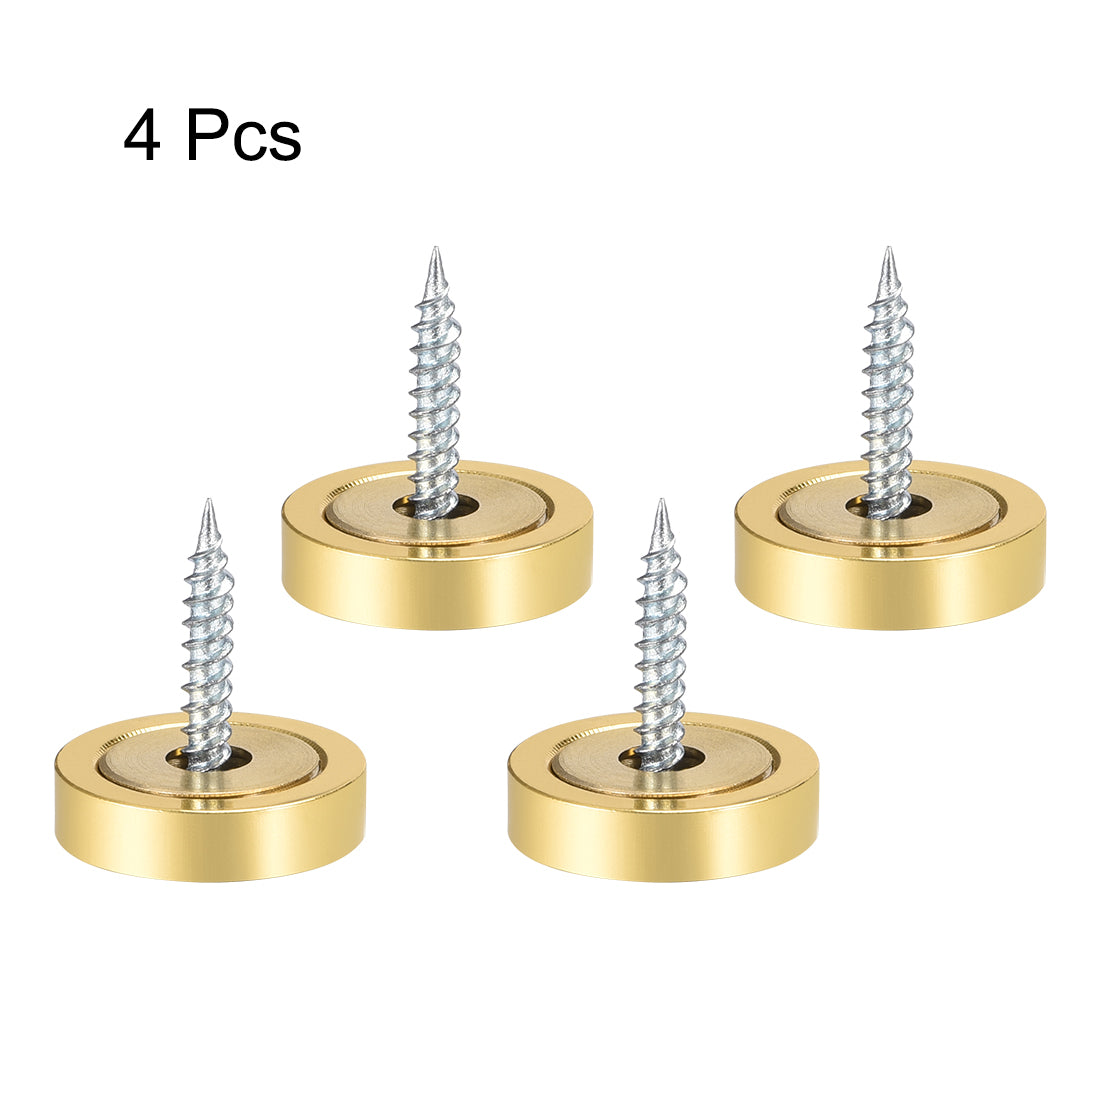 uxcell Uxcell Mirror Screws Decorative Cap Cover Polished 4pcs